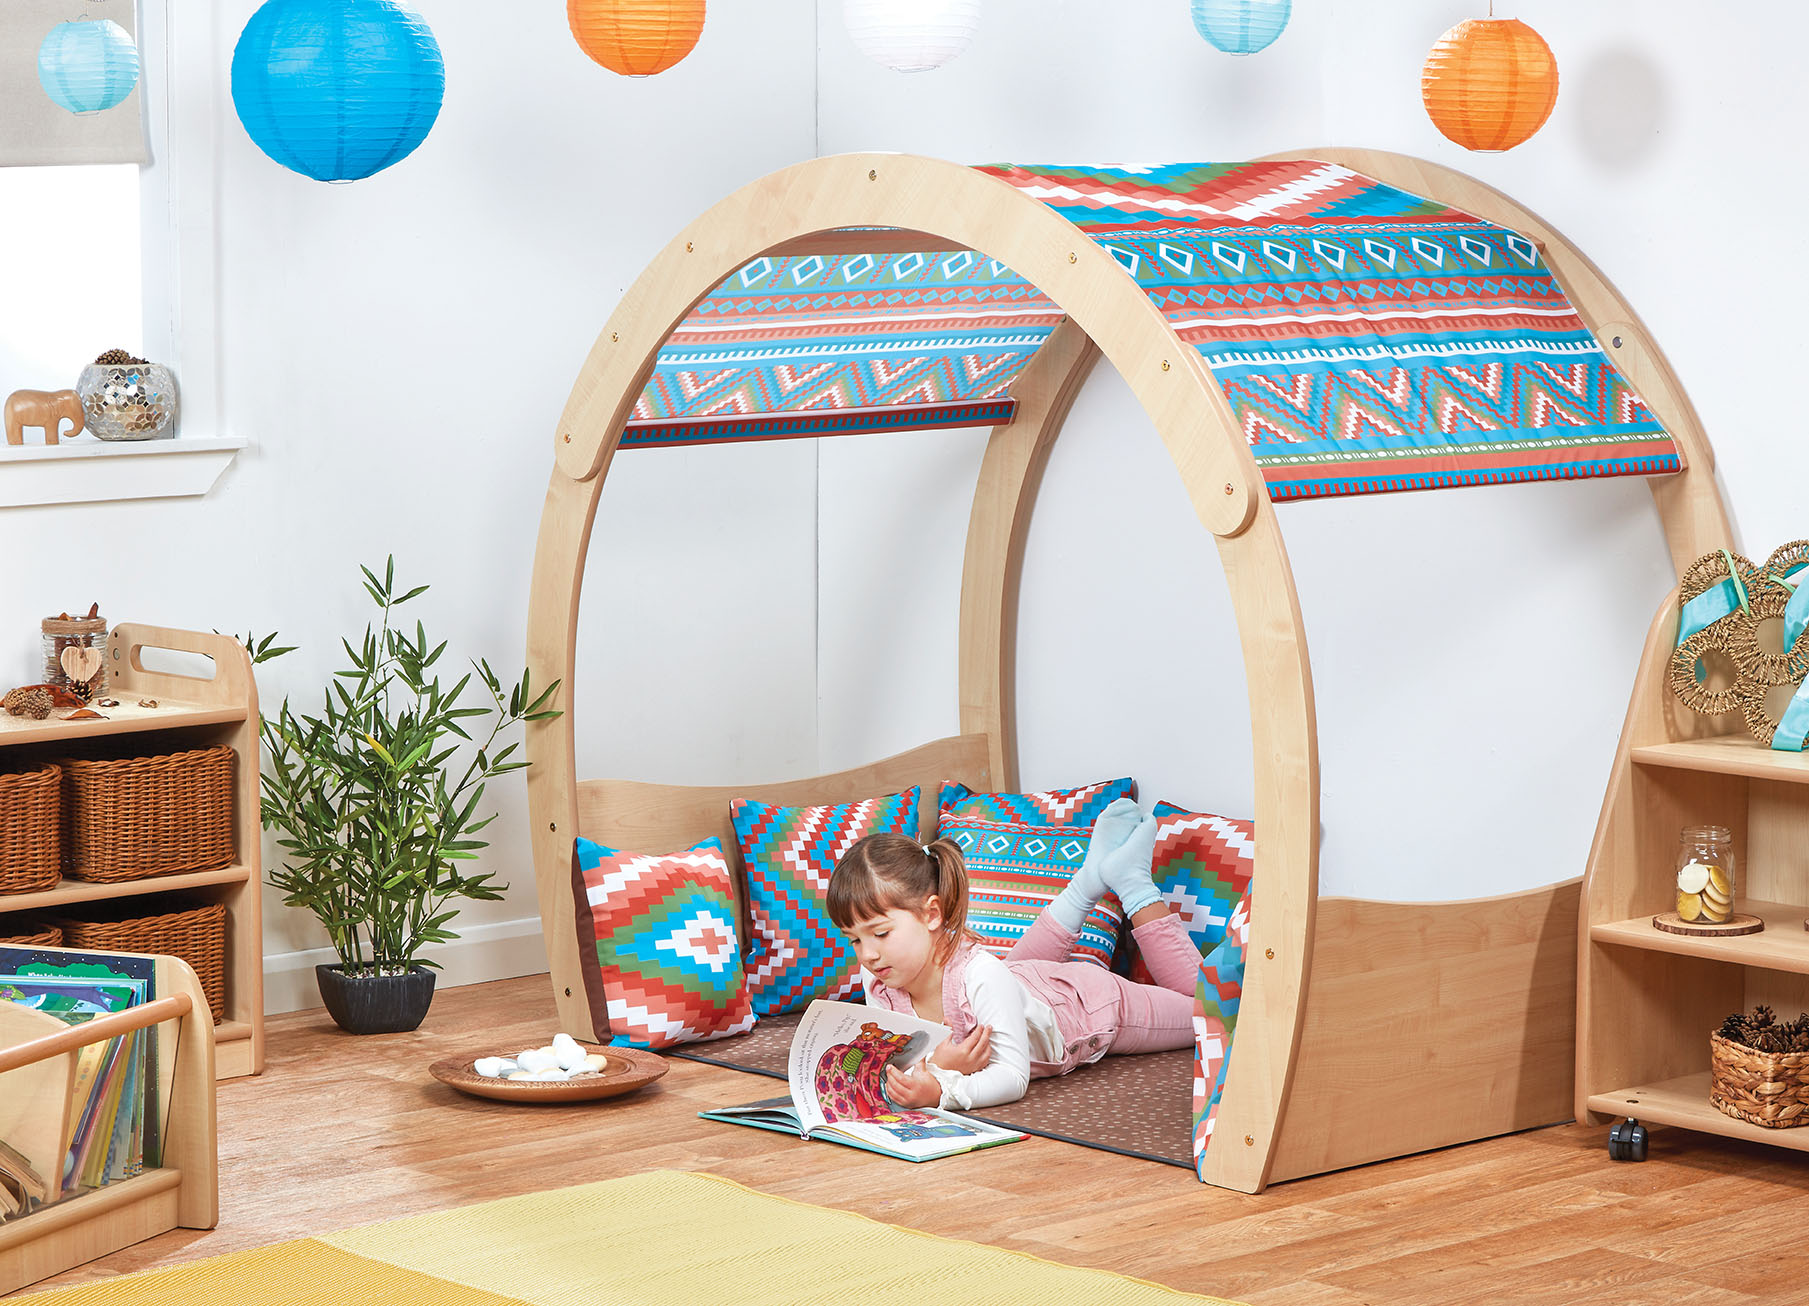 PT1025-Millhouse-Early-Years-Furniture-Large-Cosy-Cove-With-Aztec-Accessory-Set_Lifestyle_RGB.jpg